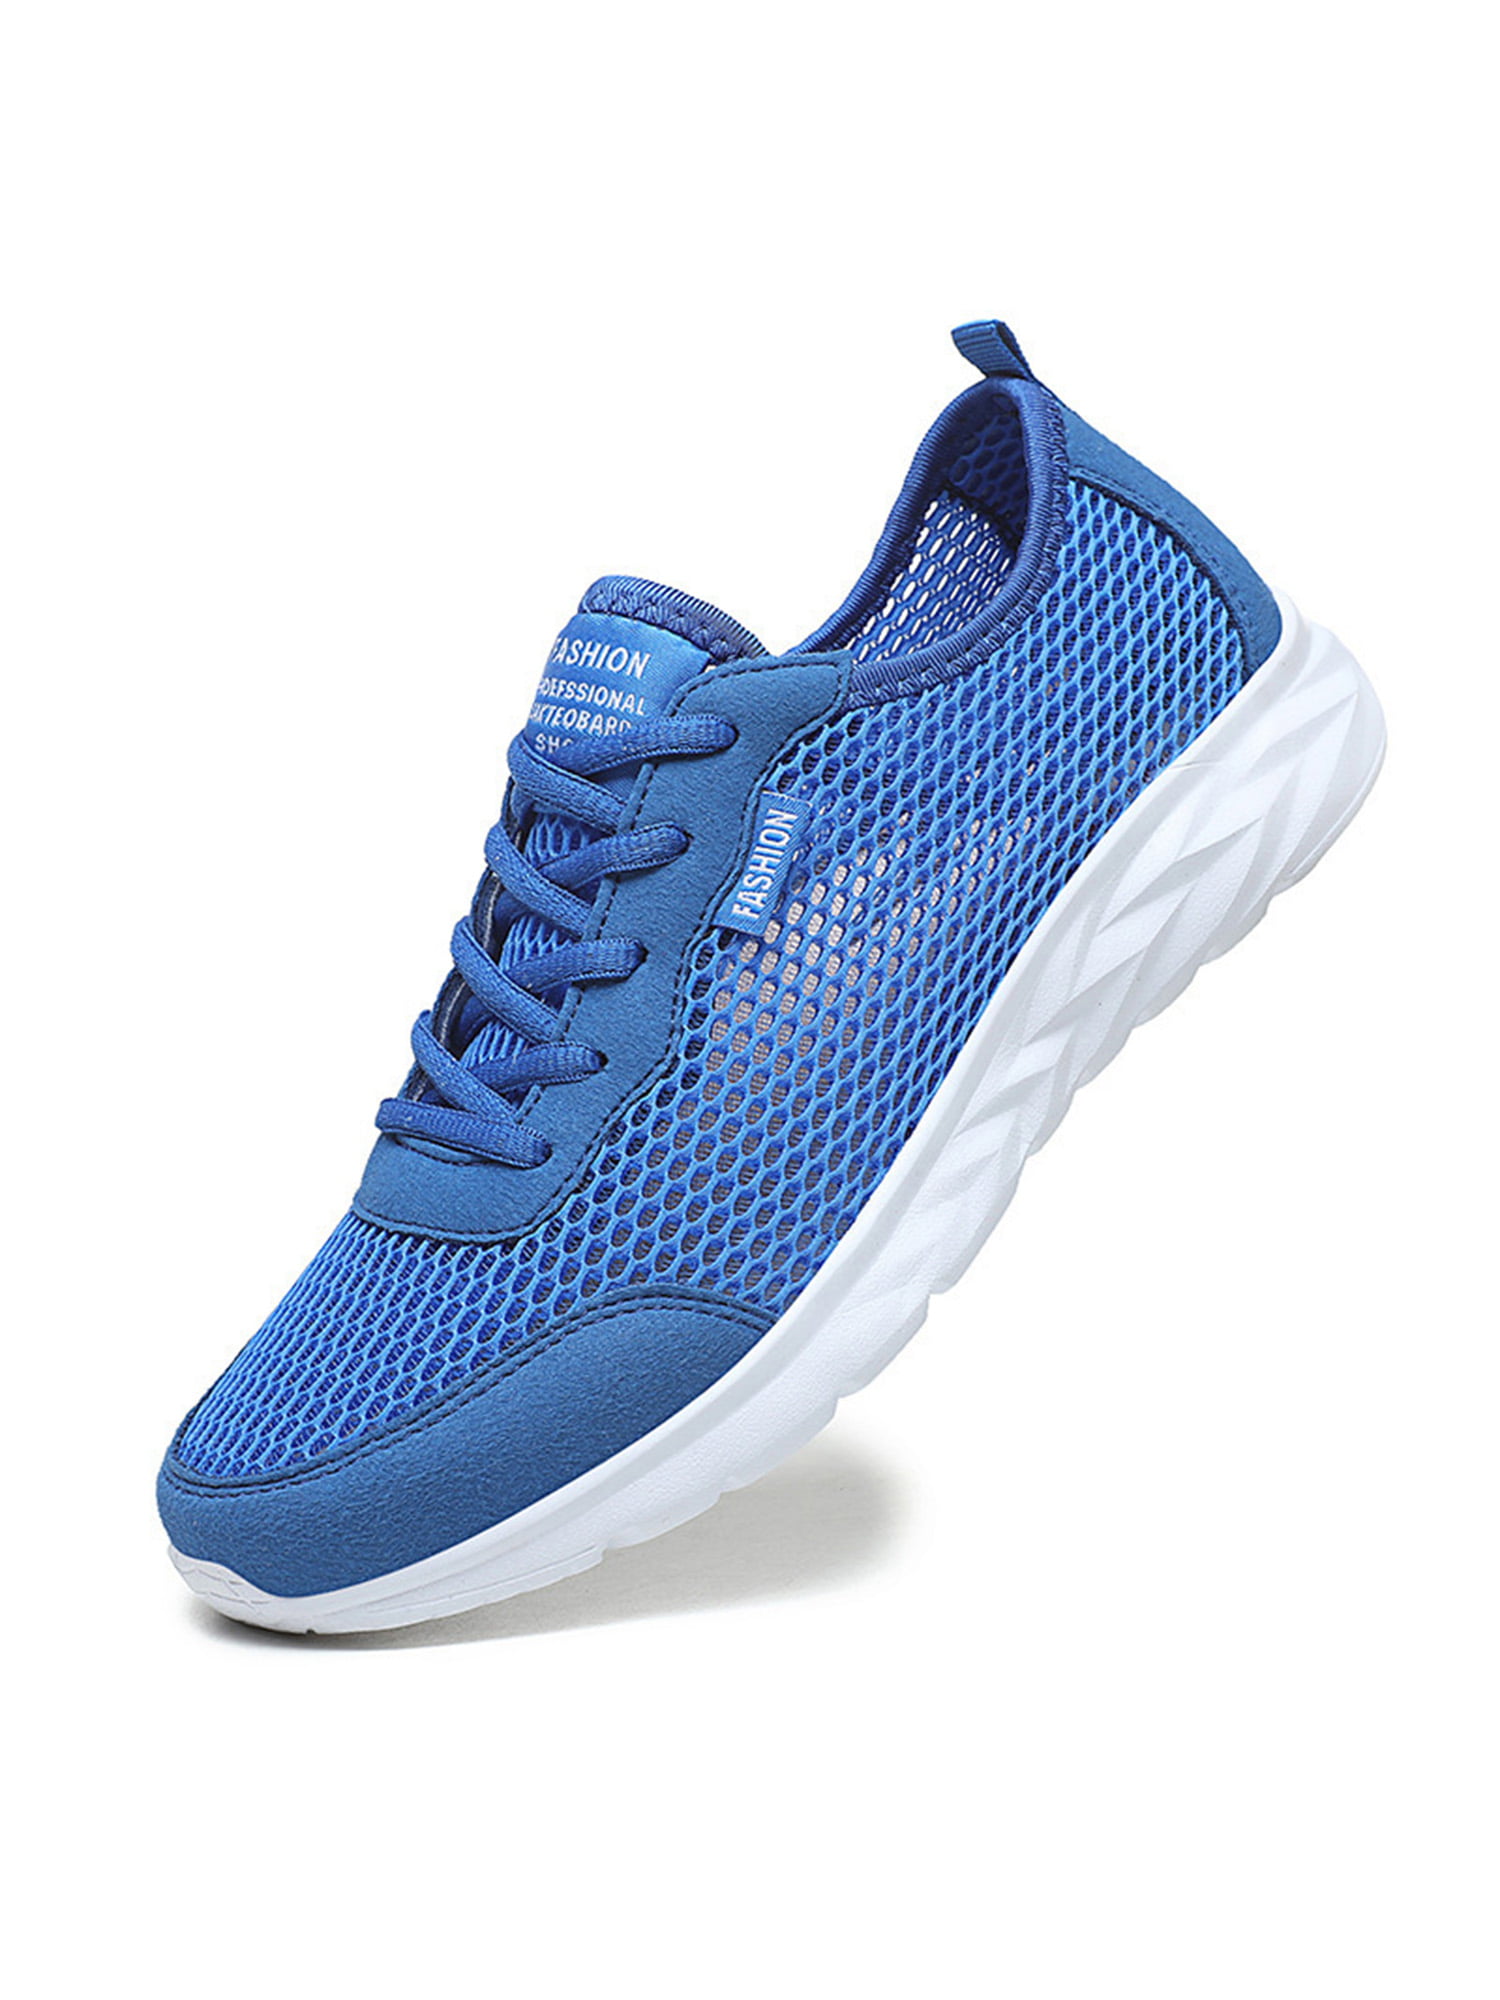 Details about   MENS NEW RUNNING GYM TRAINERS SPORT LIGHTWEIGHT BOYS WALKING SHOES SNEAKERS 